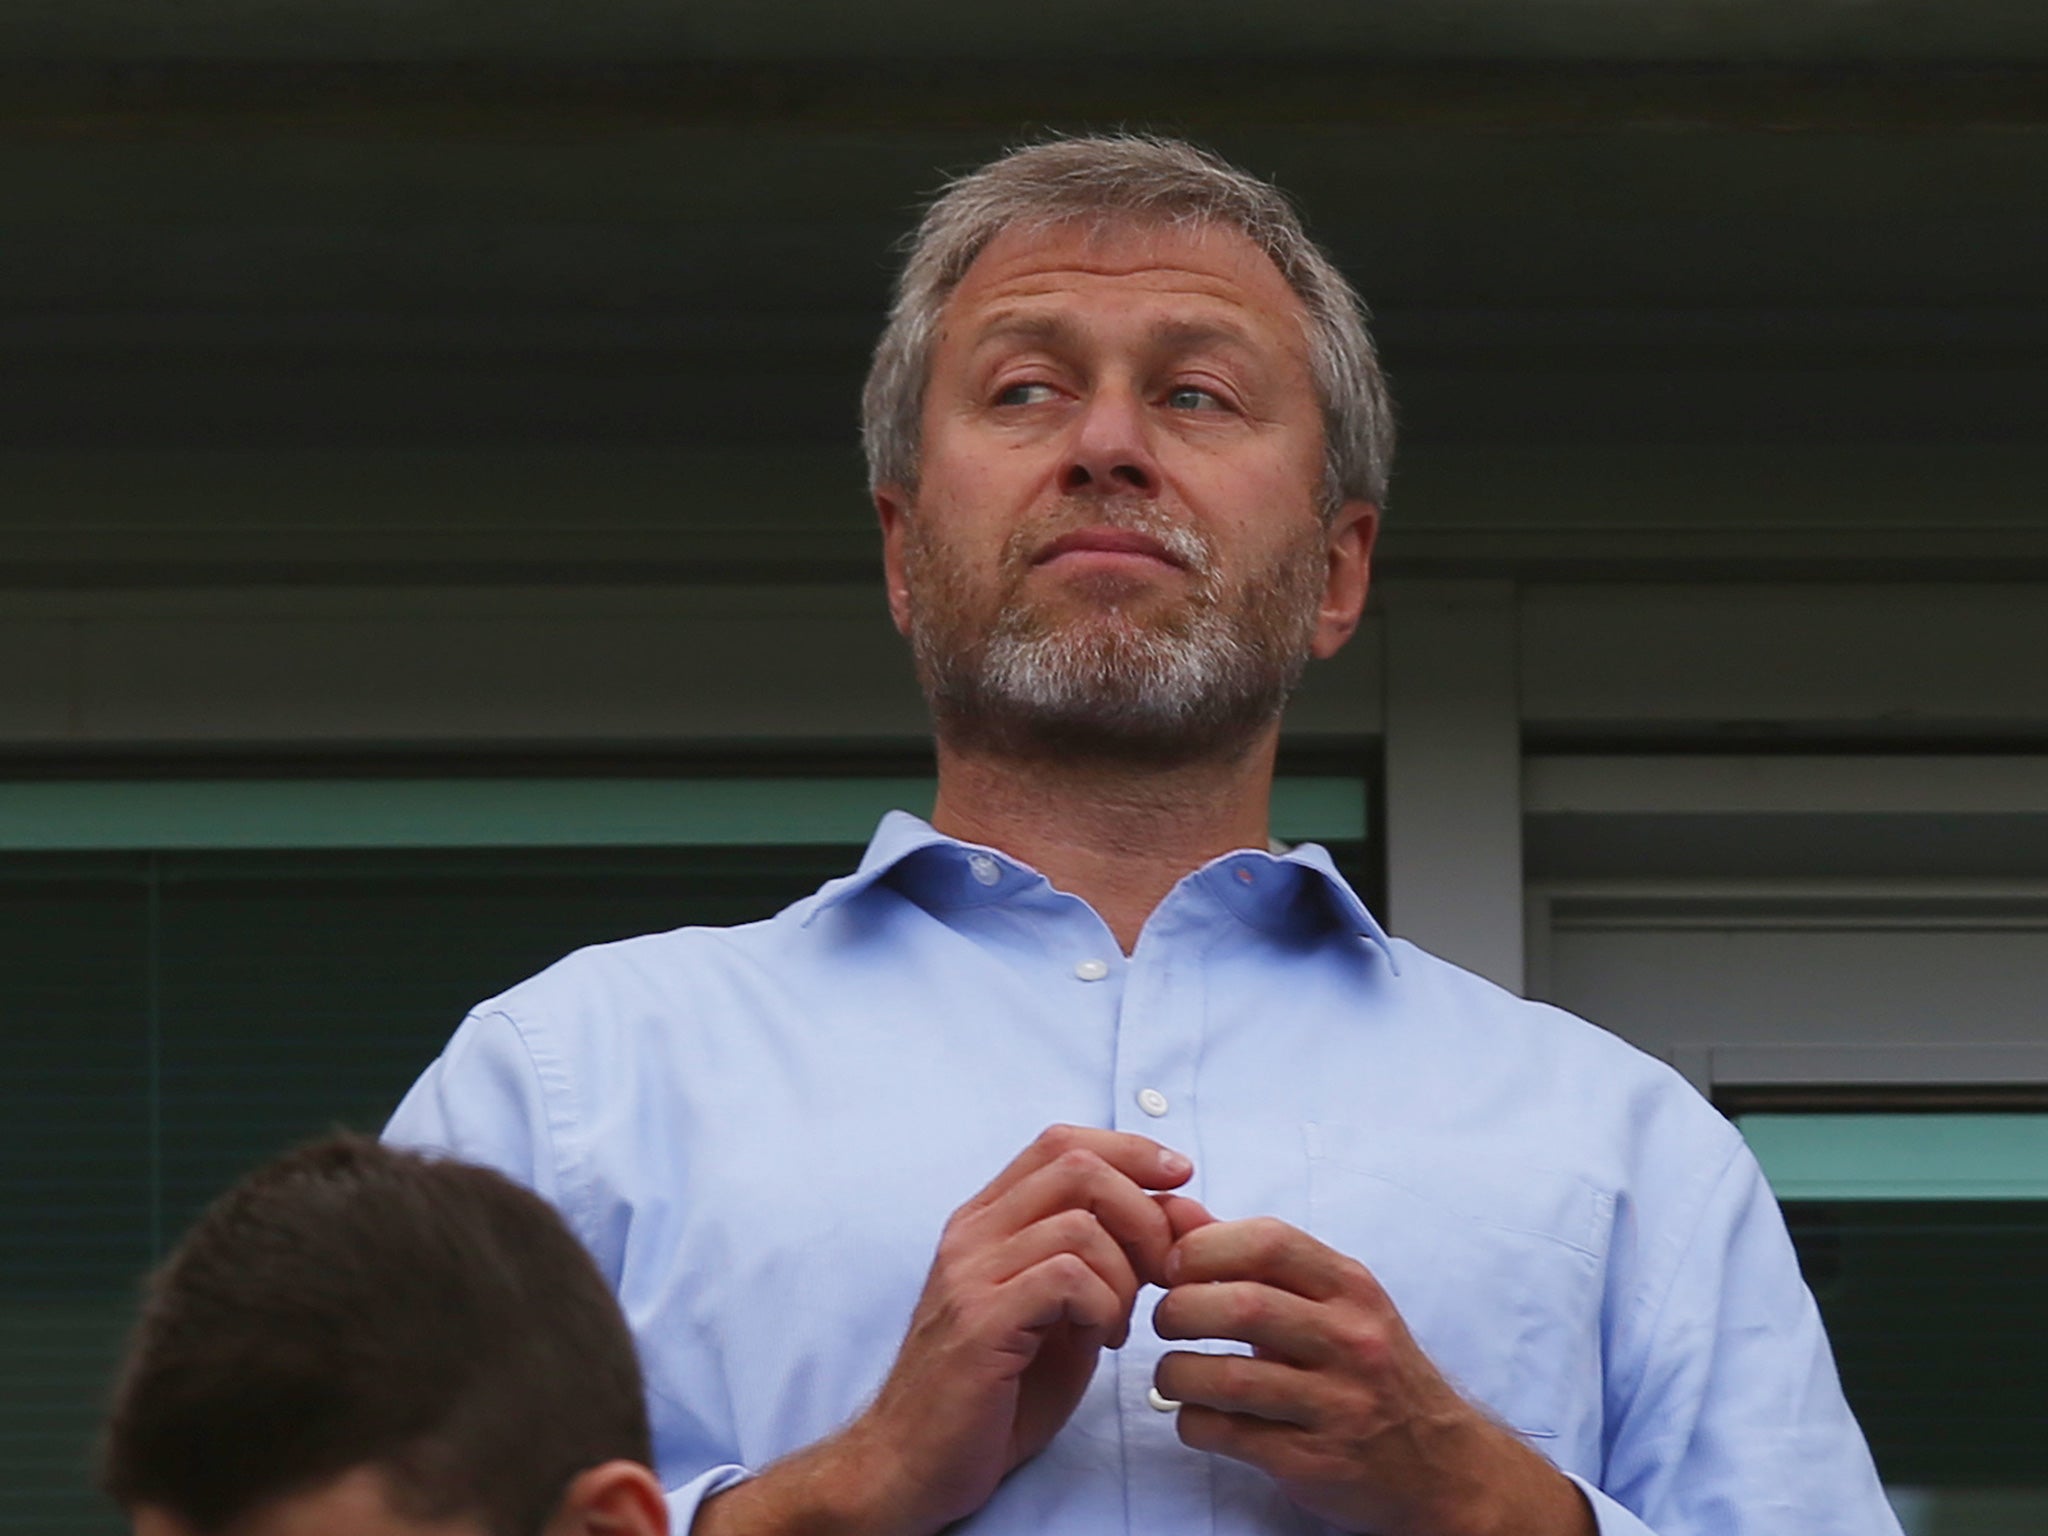 Billionaire owner of Chelsea football club Roman Abramovich is reported to be among prominent registered non-doms